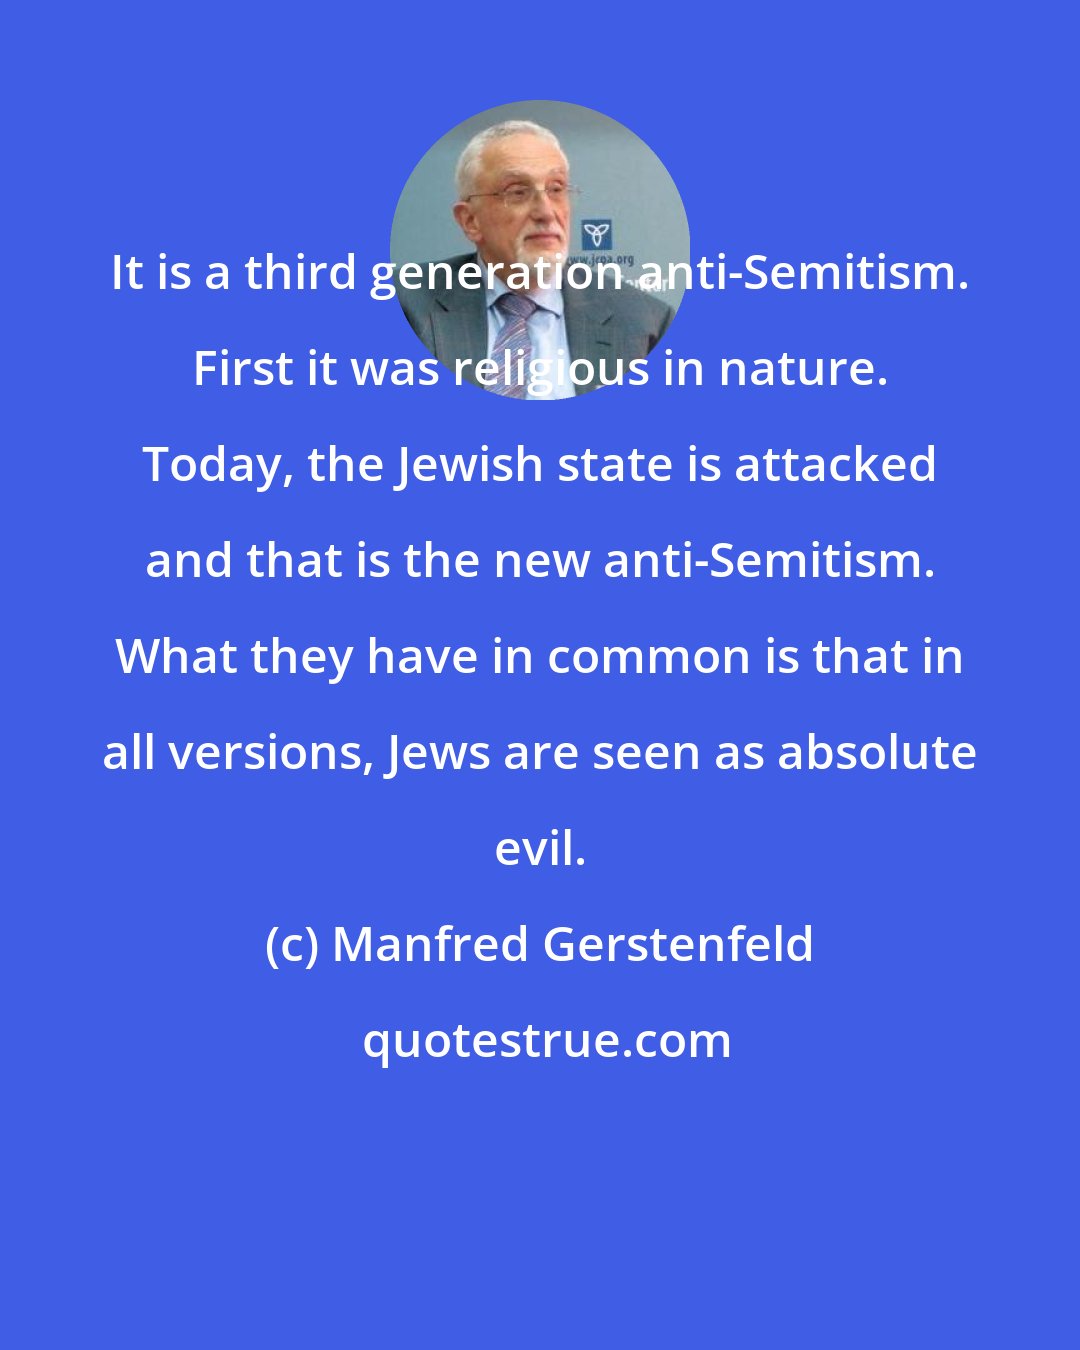 Manfred Gerstenfeld: It is a third generation anti-Semitism. First it was religious in nature. Today, the Jewish state is attacked and that is the new anti-Semitism. What they have in common is that in all versions, Jews are seen as absolute evil.